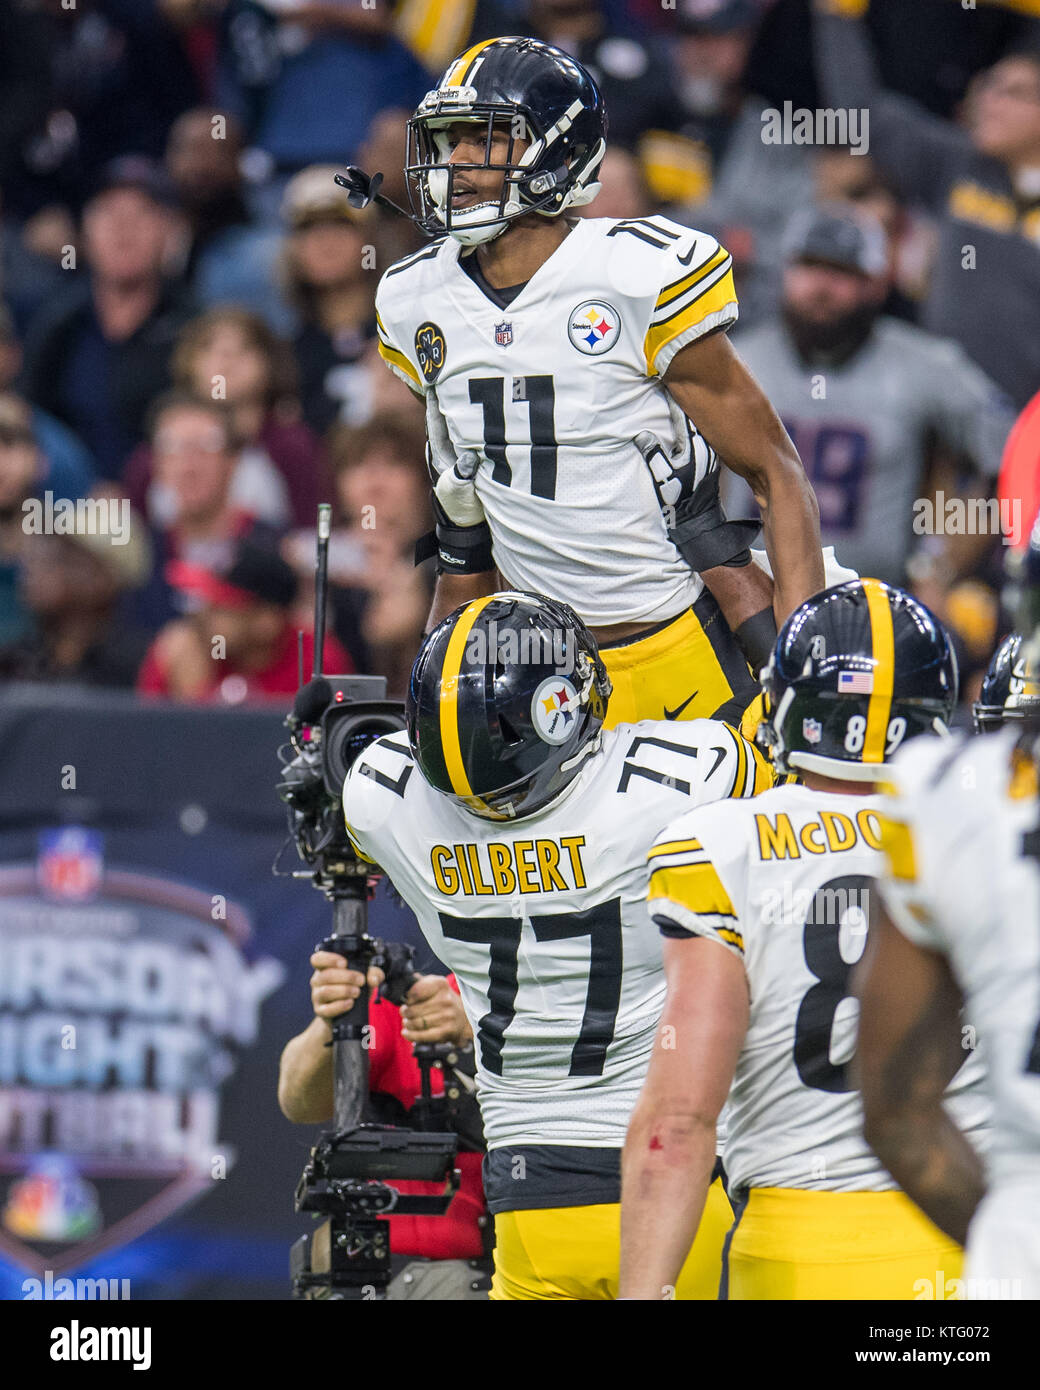 Houston, TX, USA. 25th Dec, 2017. Pittsburgh Steelers wide receiver Justin Hunter (11) celebrates his touchdown reception with Pittsburgh Steelers offensive tackle Marcus Gilbert (77) during the 1st quarter of an NFL football game between the Houston Texans and the Pittsburgh Steelers at NRG Stadium in Houston, TX. Trask Smith/CSM/Alamy Live News Stock Photo